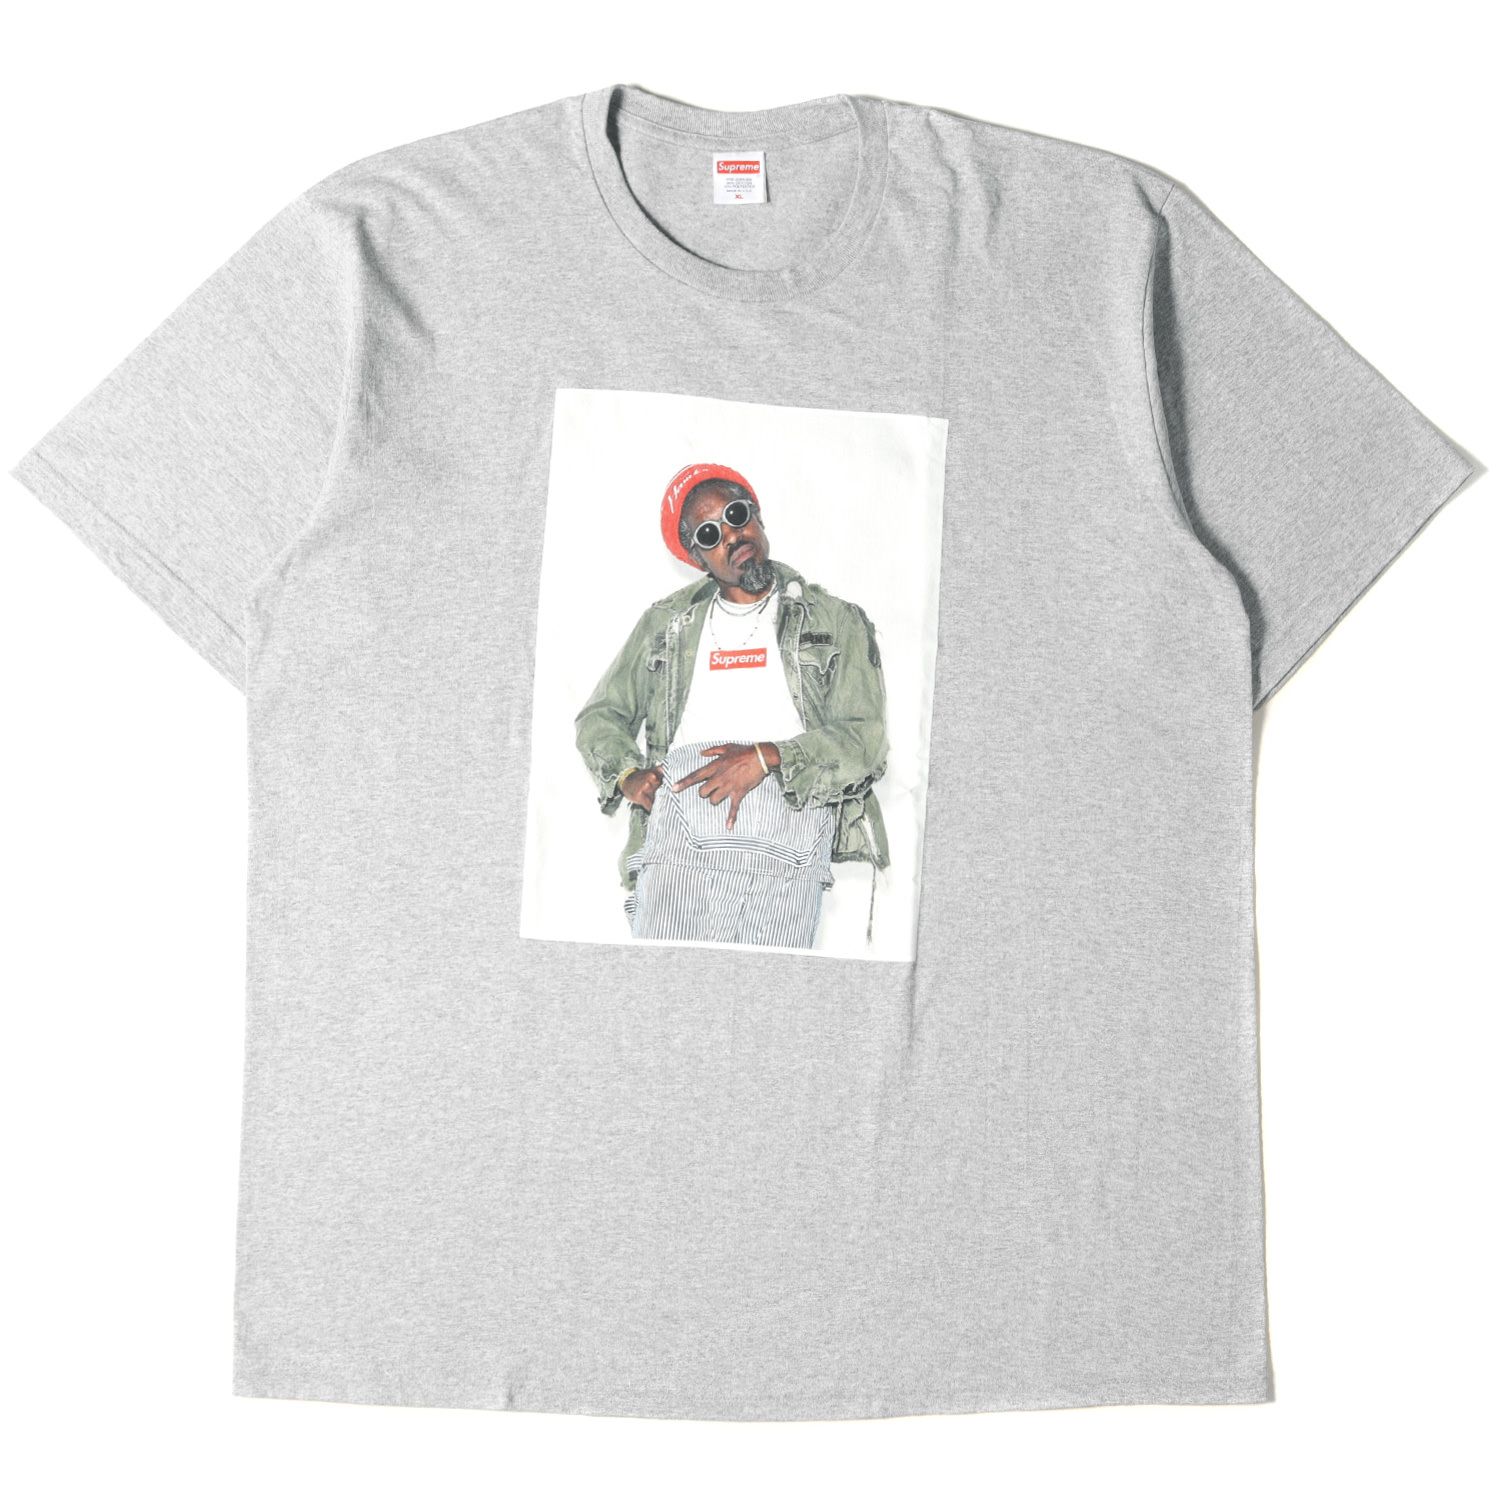 S Supreme Andre 3000 Tee Outkast アウトキャスト-